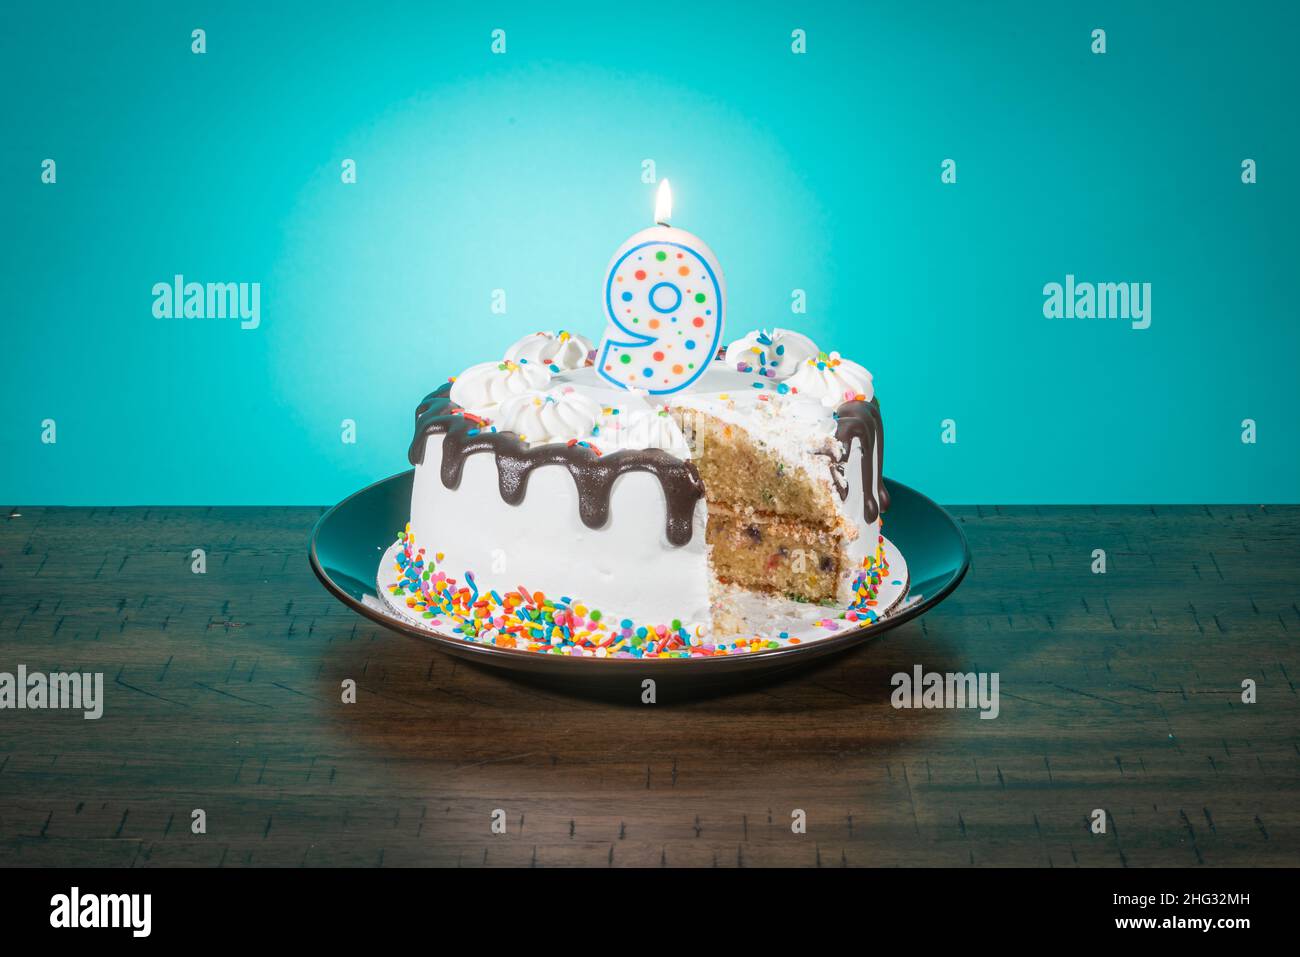 A birthday cake, missing a slice, bears a candle in the shape of the number 9. Stock Photo